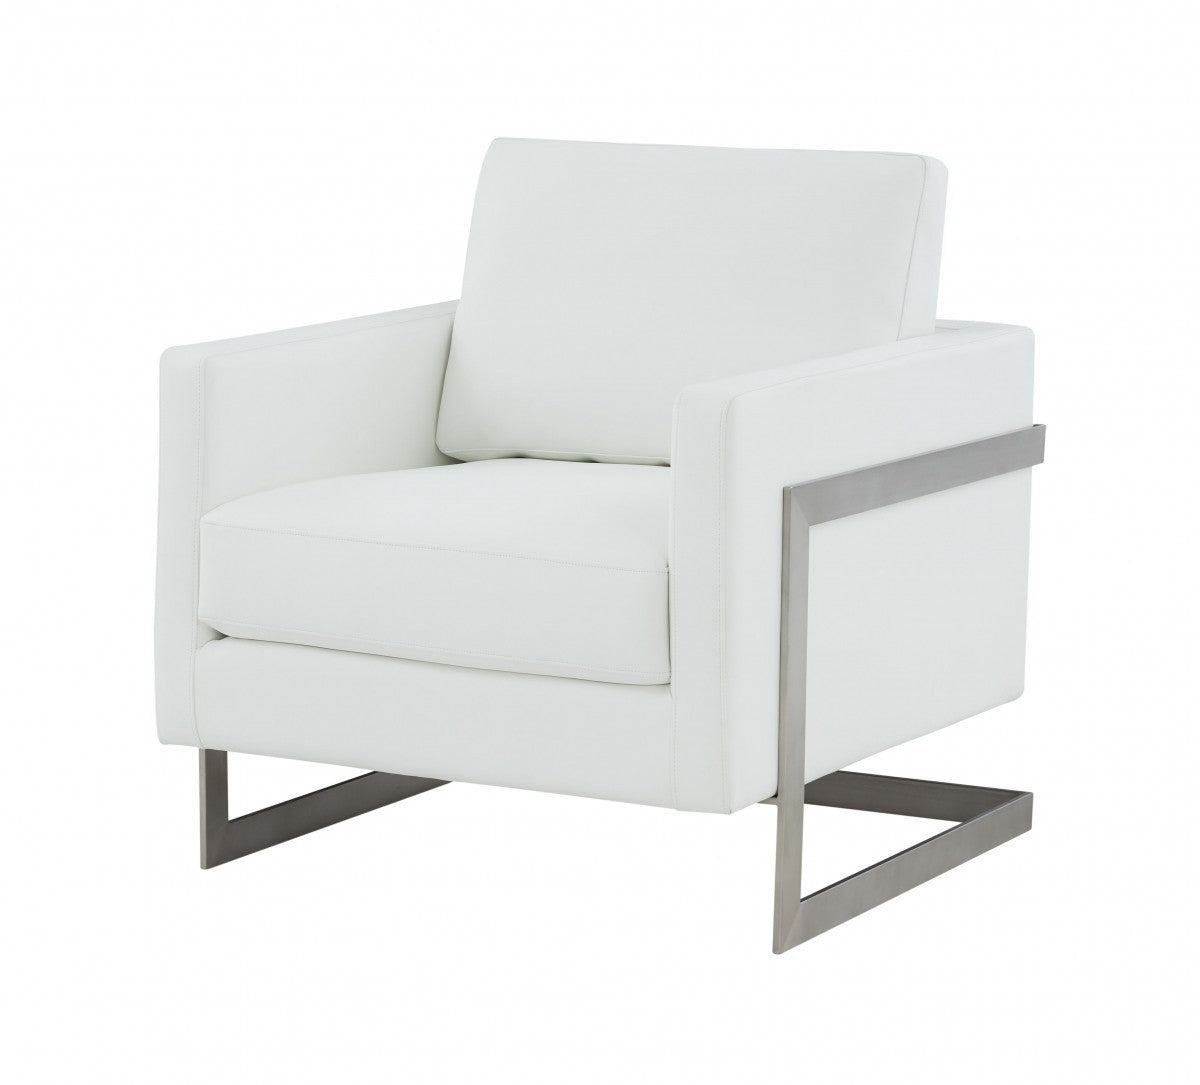 Stylish White and Black Faux Leather Accent Chair